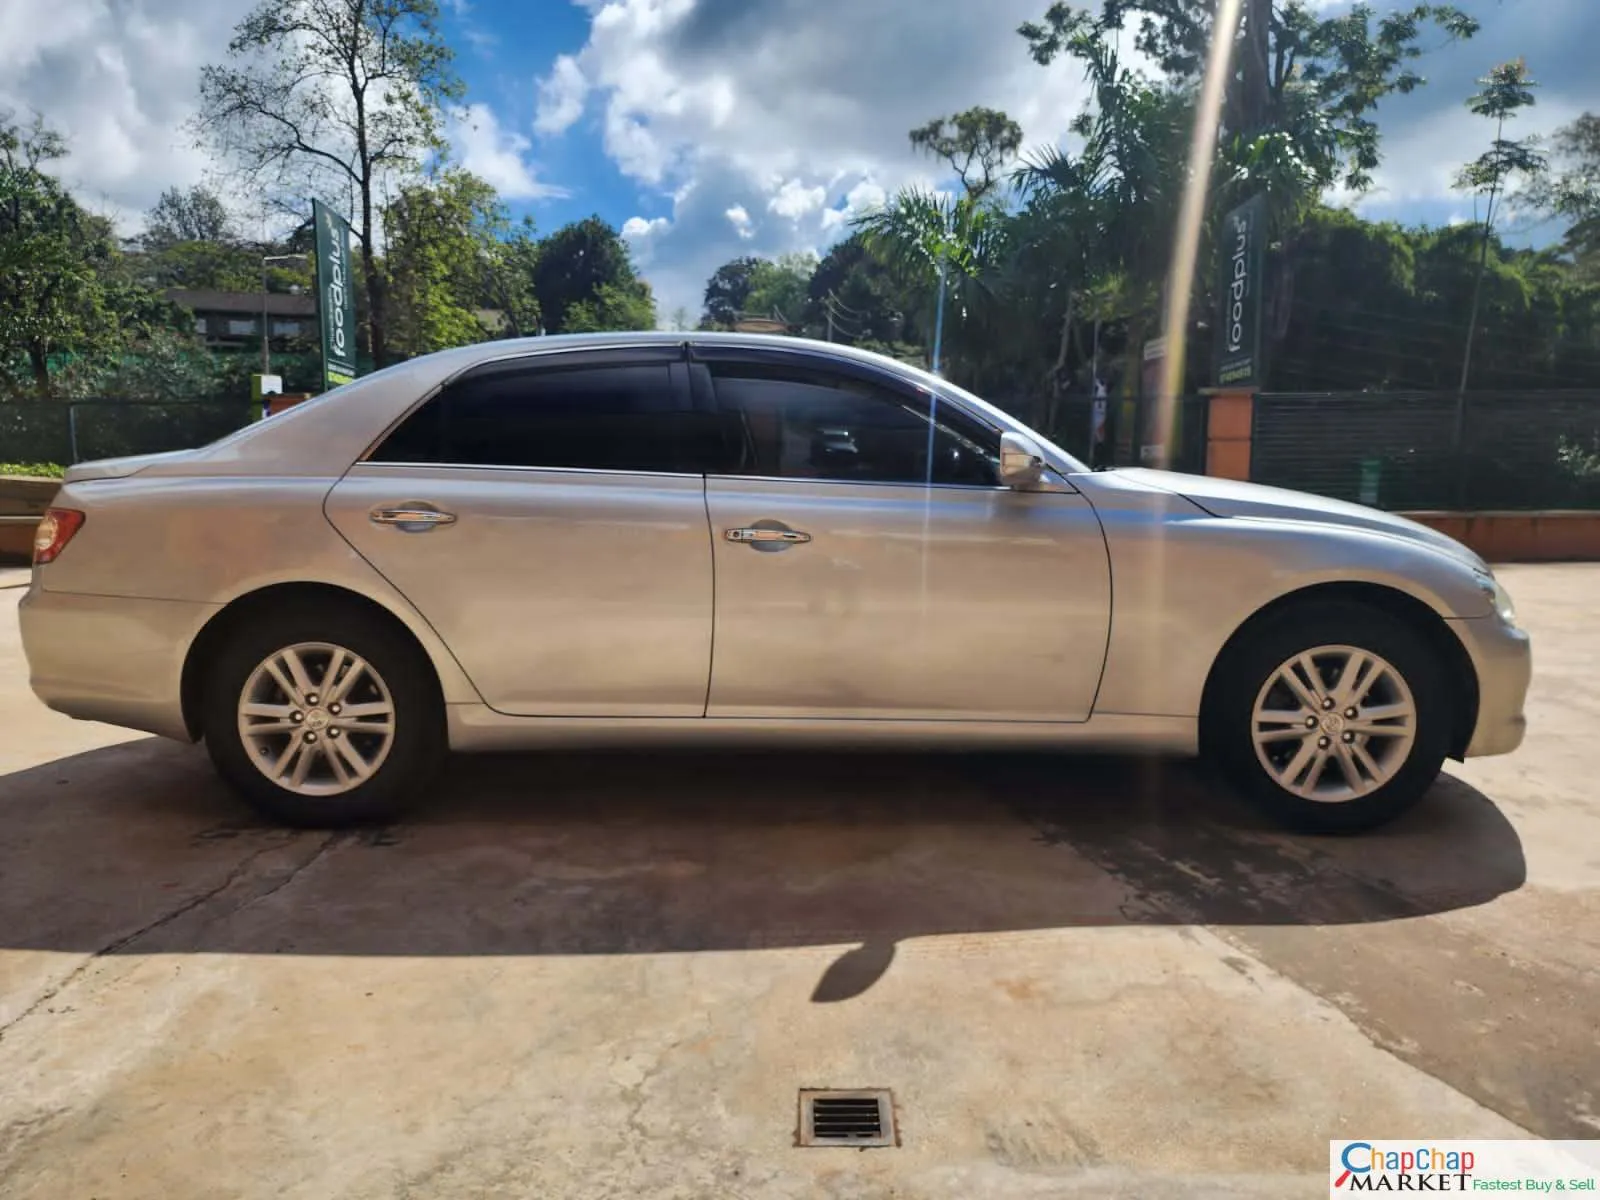 Toyota Mark X Kenya QUICK SALE You Pay 30% Deposit mark x for sale in kenya hire purchase installments Trade in OK EXCLUSIVE